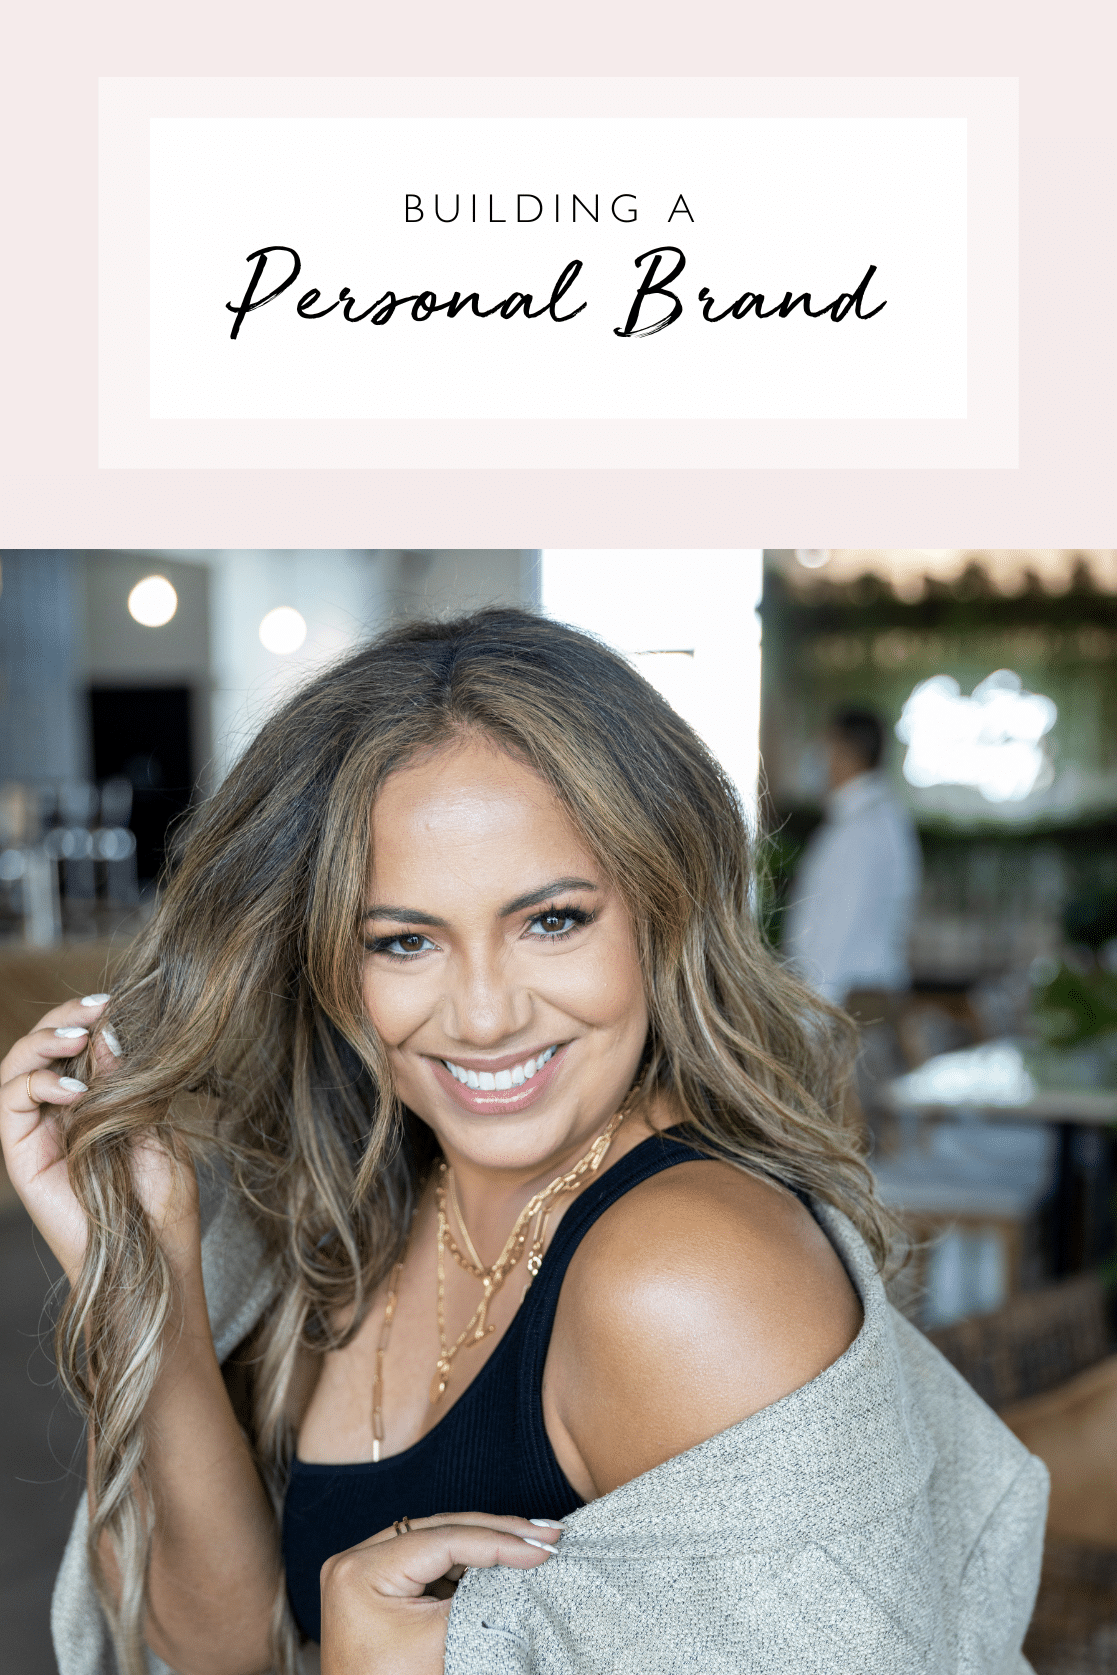 Building a personal brand with Nicole Nieves.